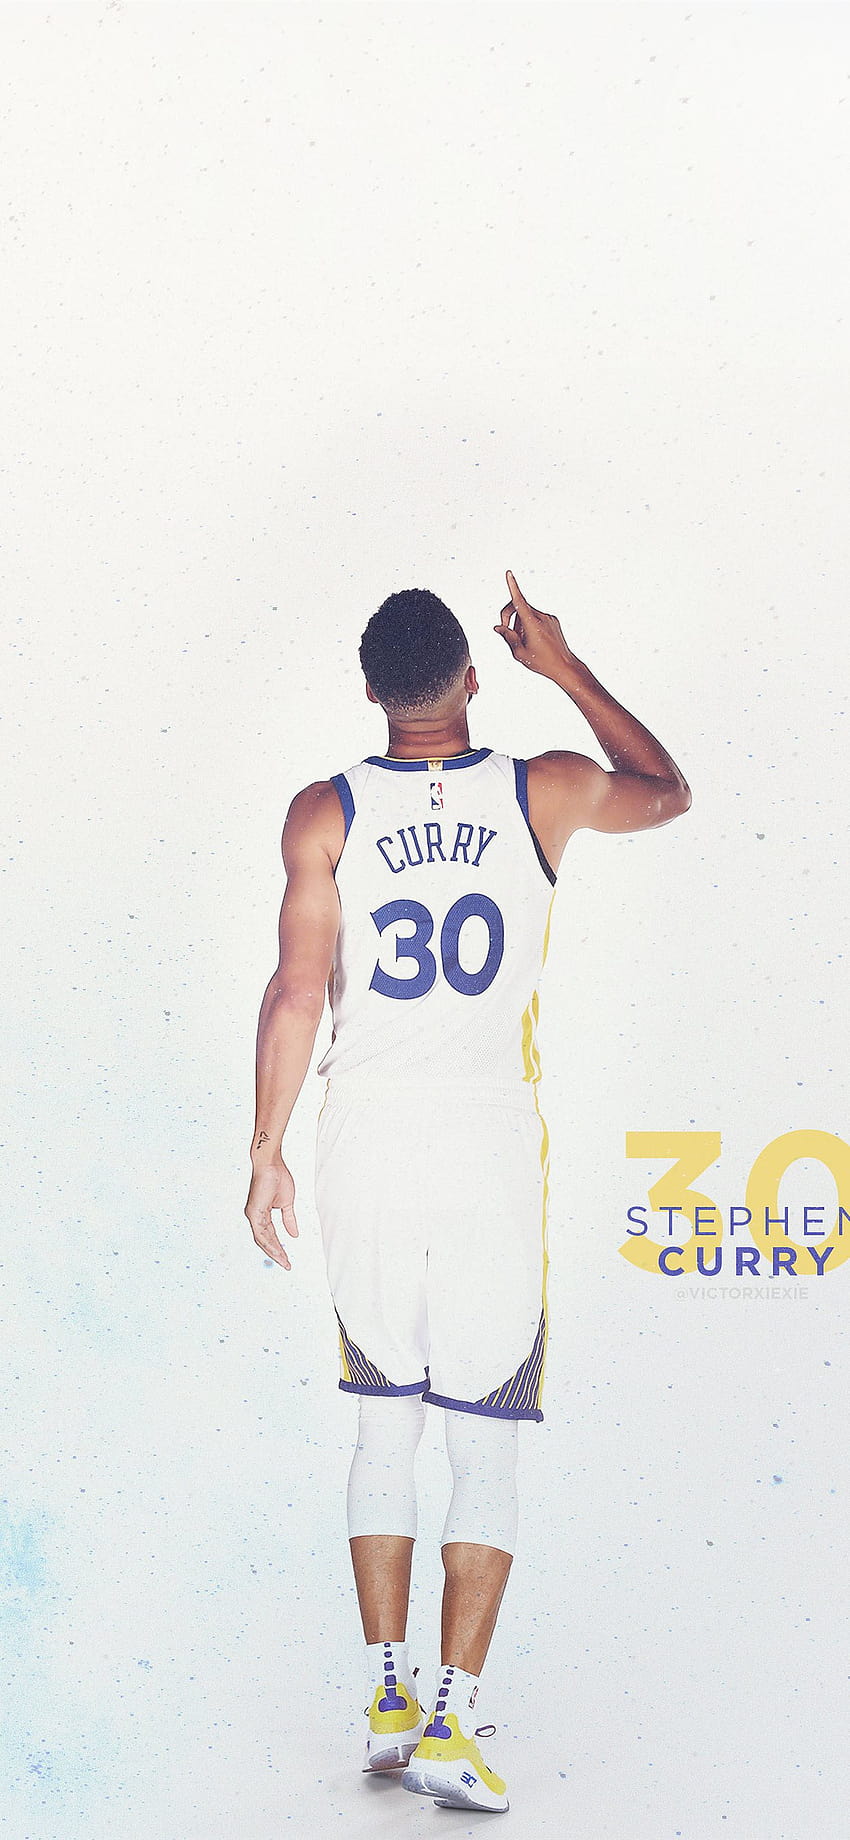 Stephen Curry Steph Curry Nba Stephen iPhone 11, curry 30 HD phone wallpaper